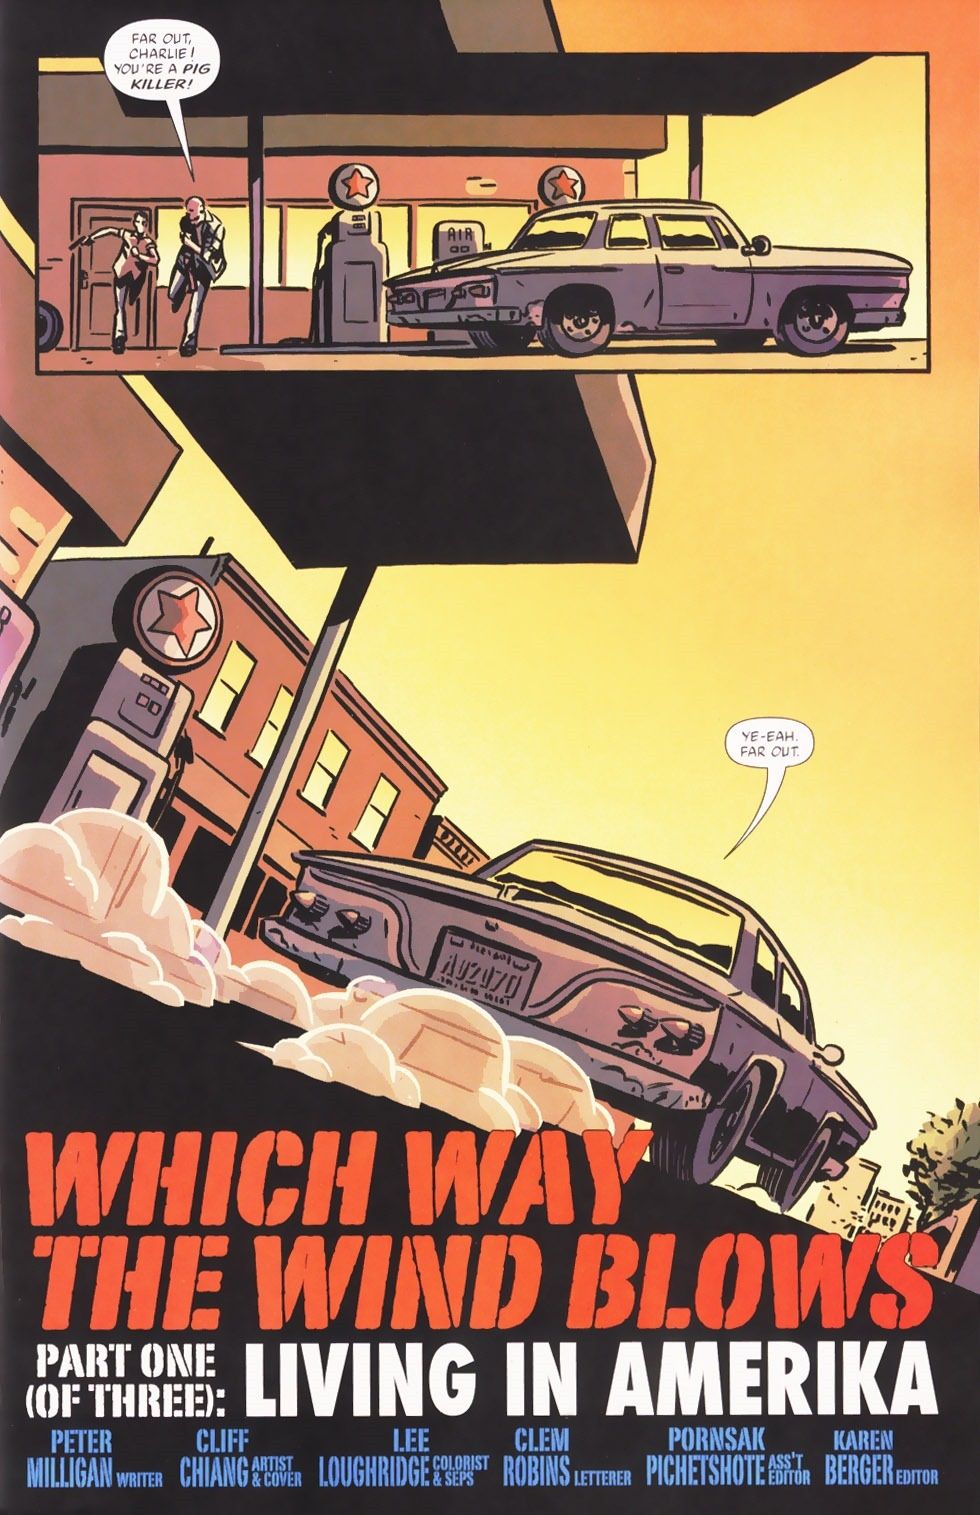 A Bob Dylan title reference in Human Target #7